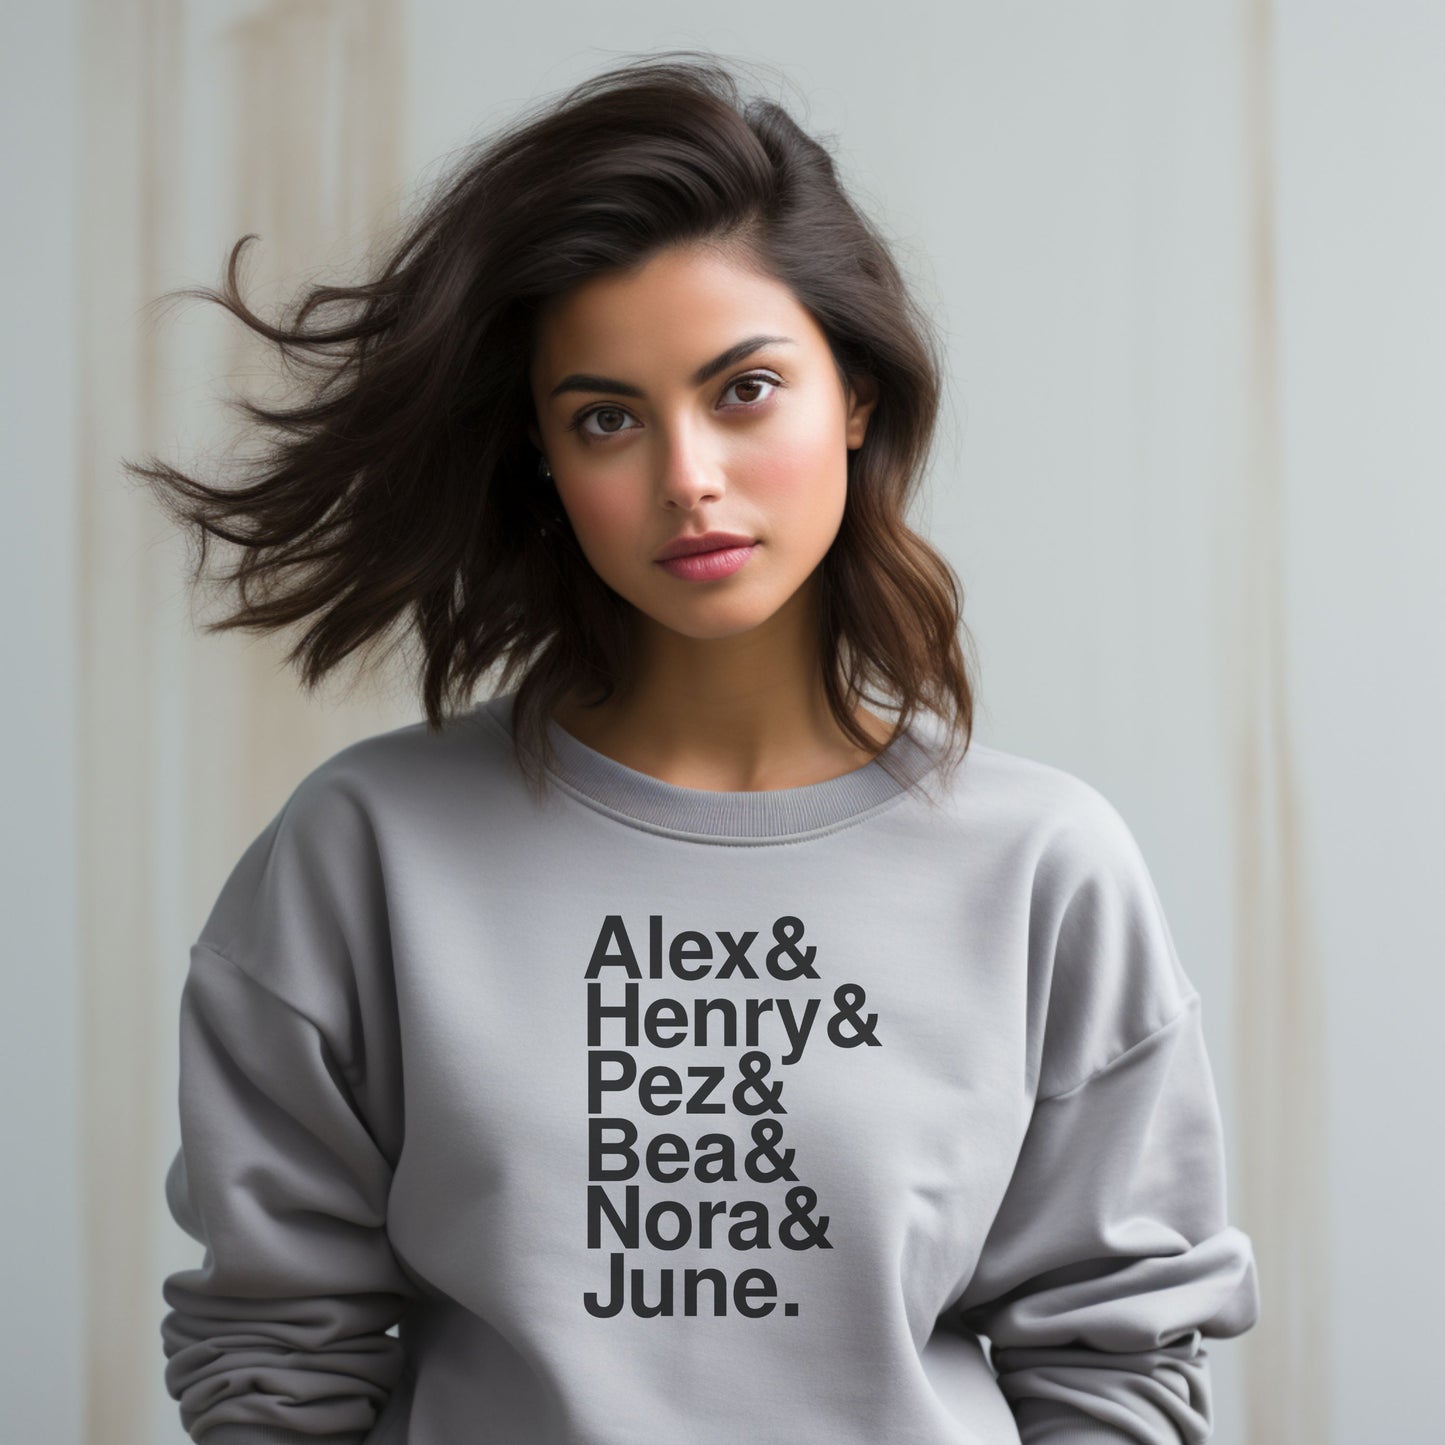 Red White & Royal Blue Character Names Sweatshirt, RWRB, Alex Claremont-Diaz, Prince Henry, Gifts for Readers, Book Lover, LGBTQ Queer